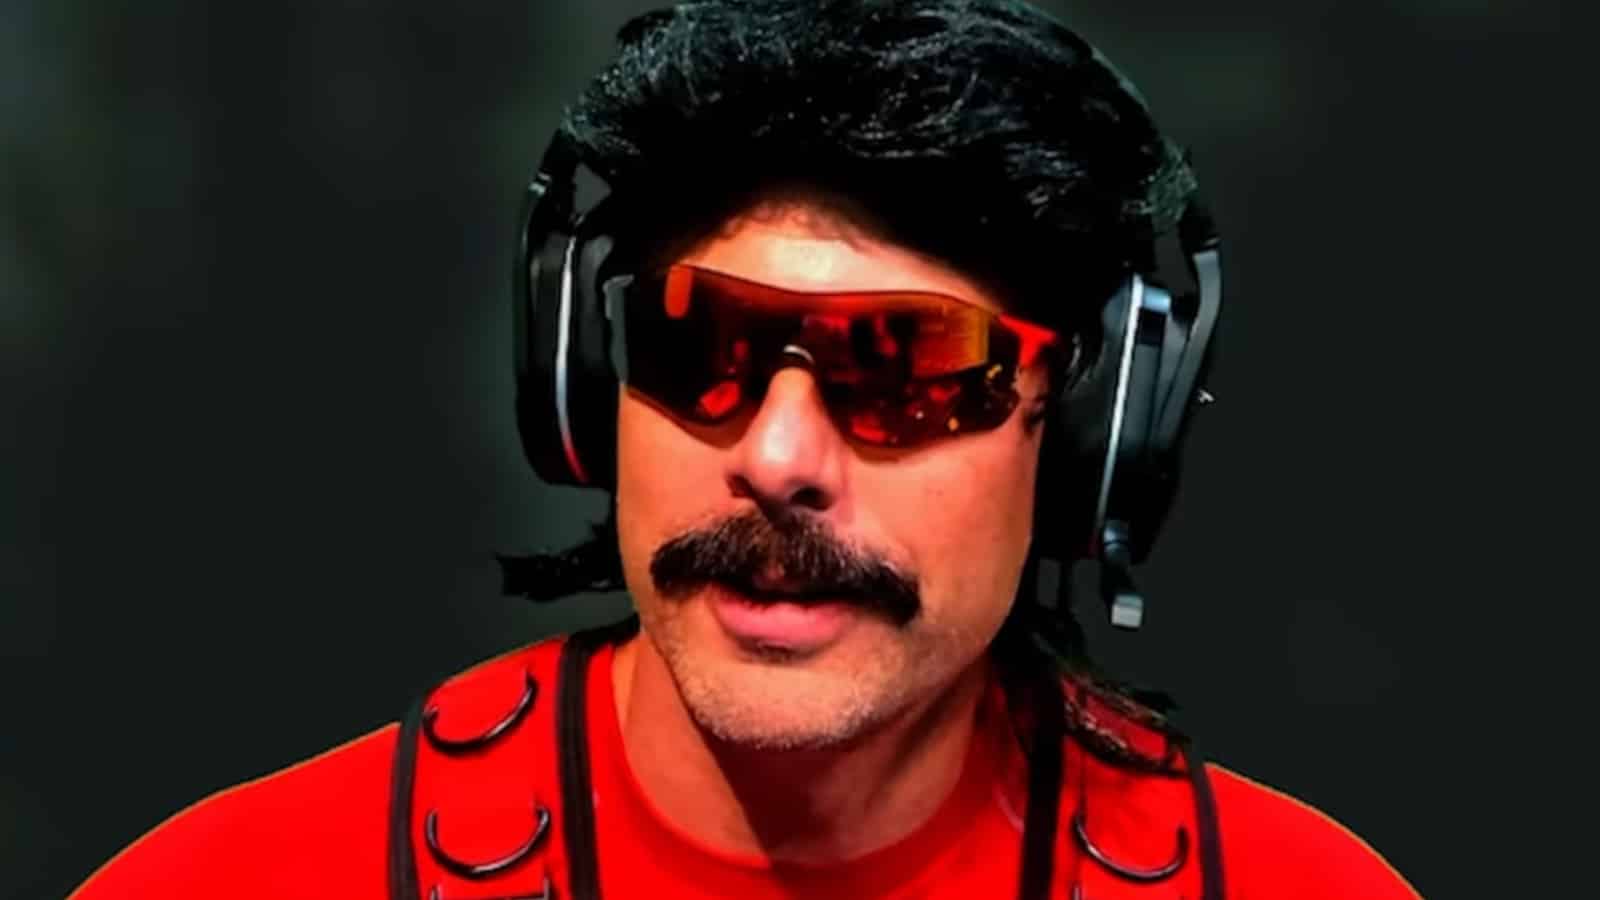 Dr Disrespect streams on twitch